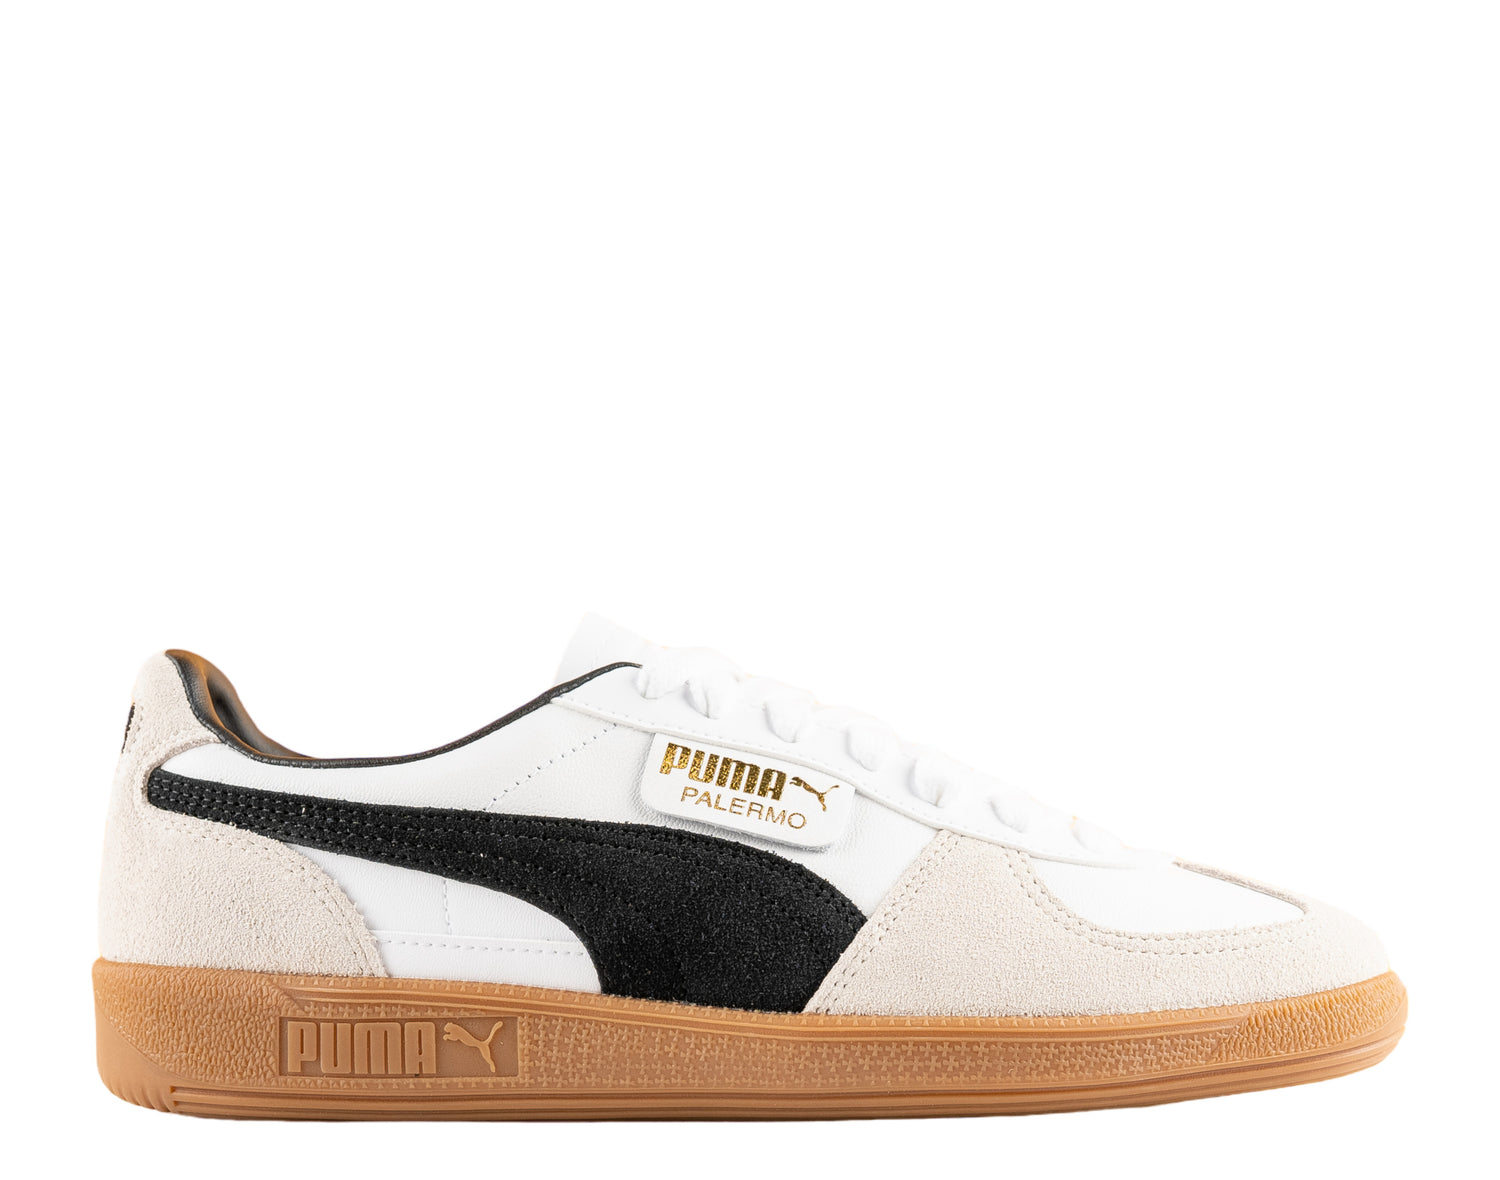 Puma Palermo Leather Unisex Sneakers - Men's Sizing